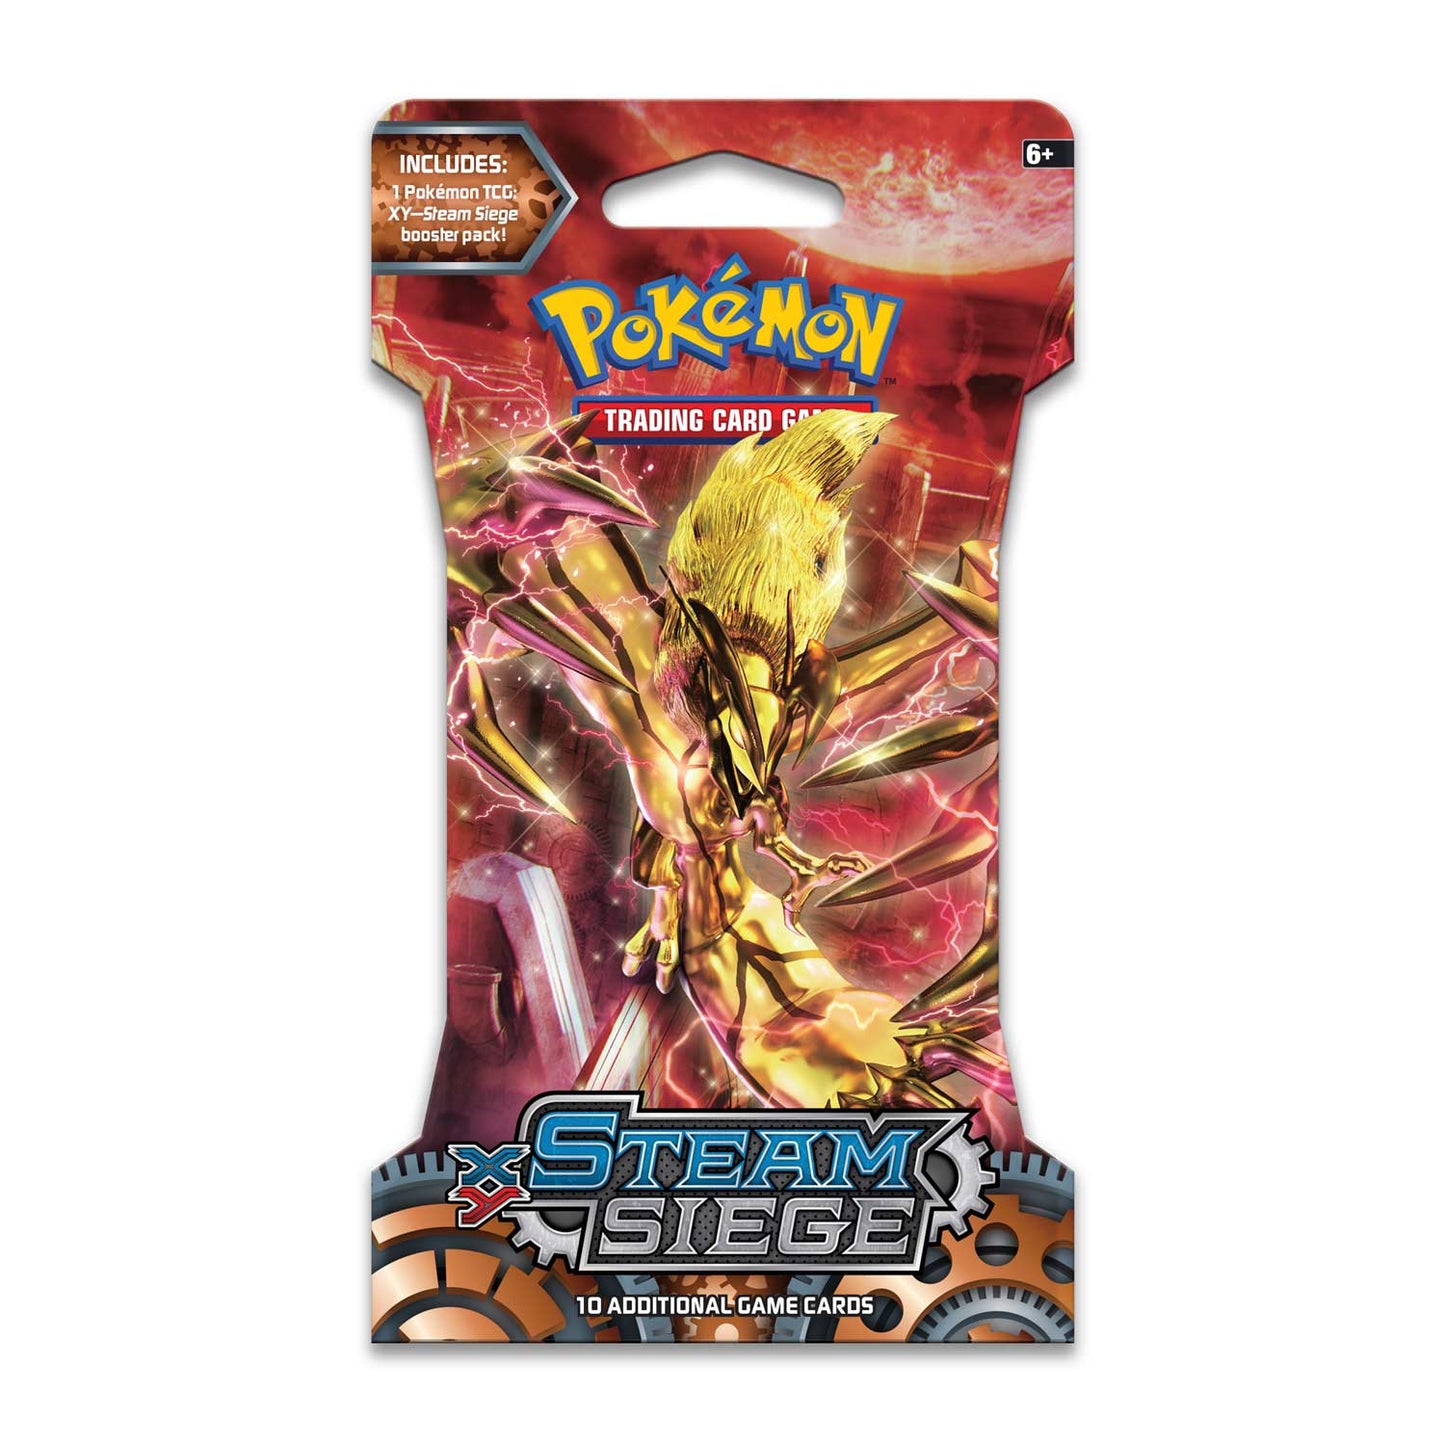 POKÉMON - STEAM SIEGE - BOOSTER PACK BLISTER / SLEEVED - XY